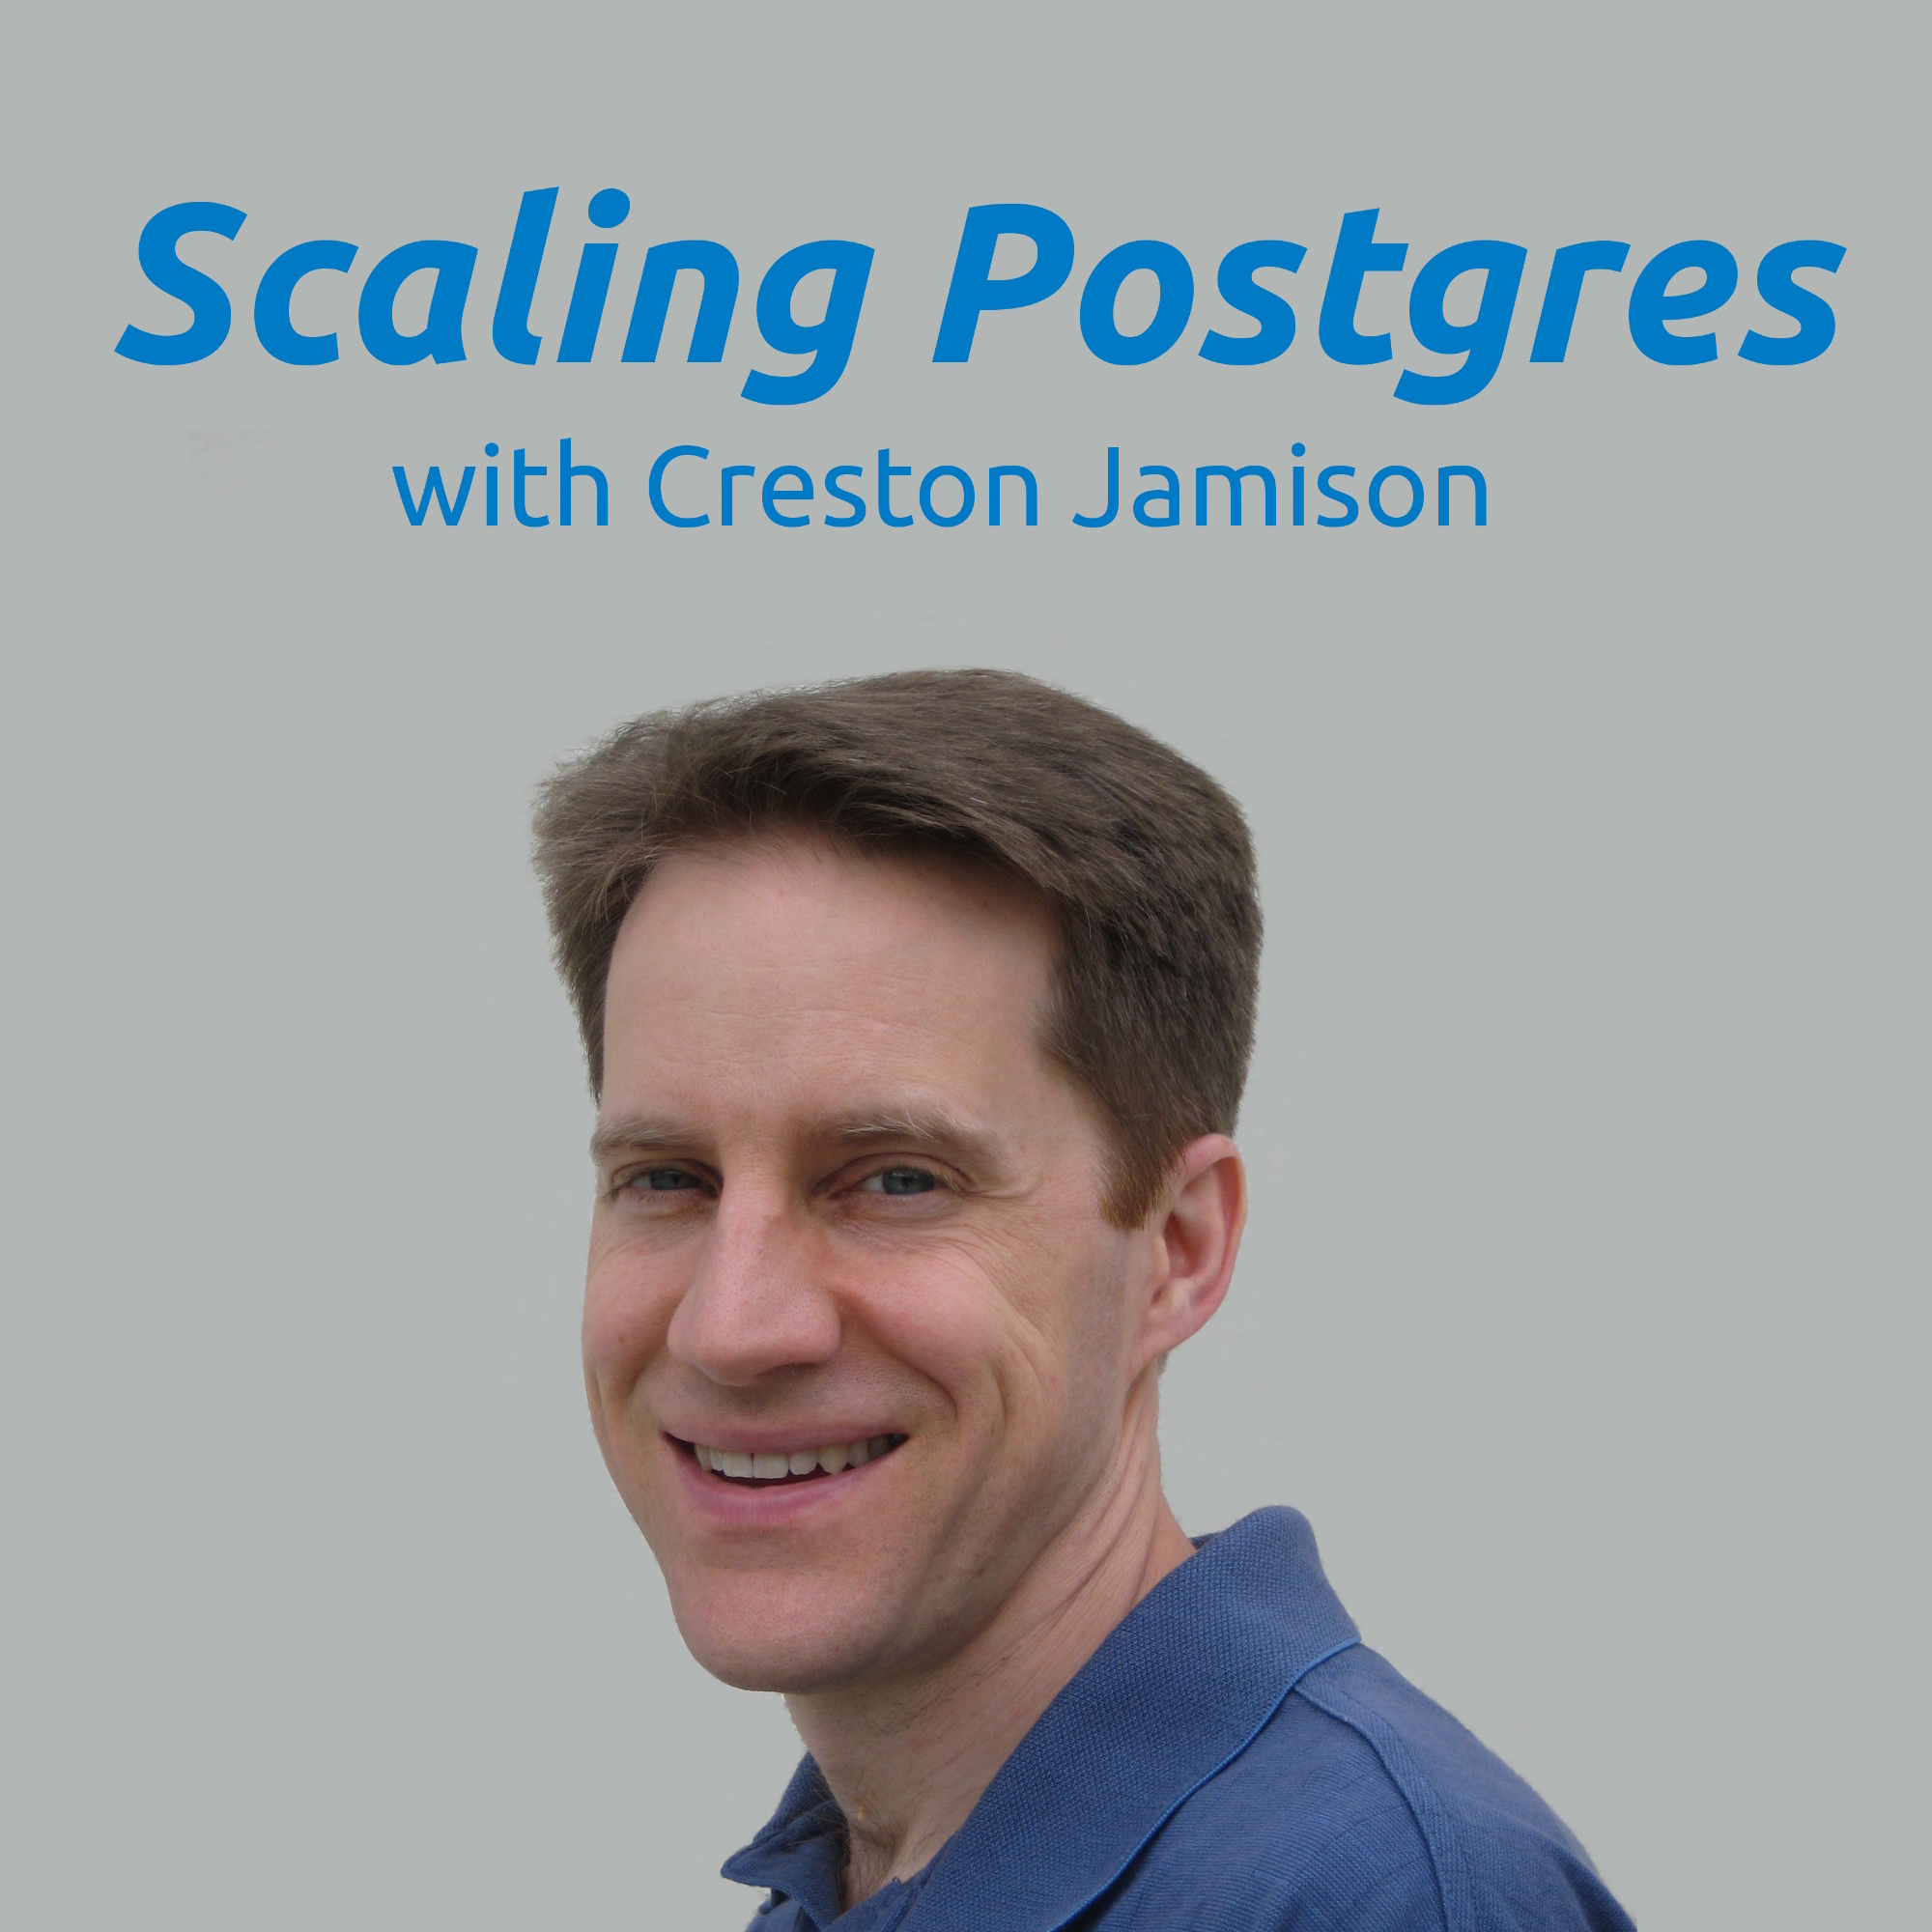 Postgres 16 RC1, Bi-Directional Replication, All About Parameters, Foreign Keys & Polymorphism | Scaling Postgres 280